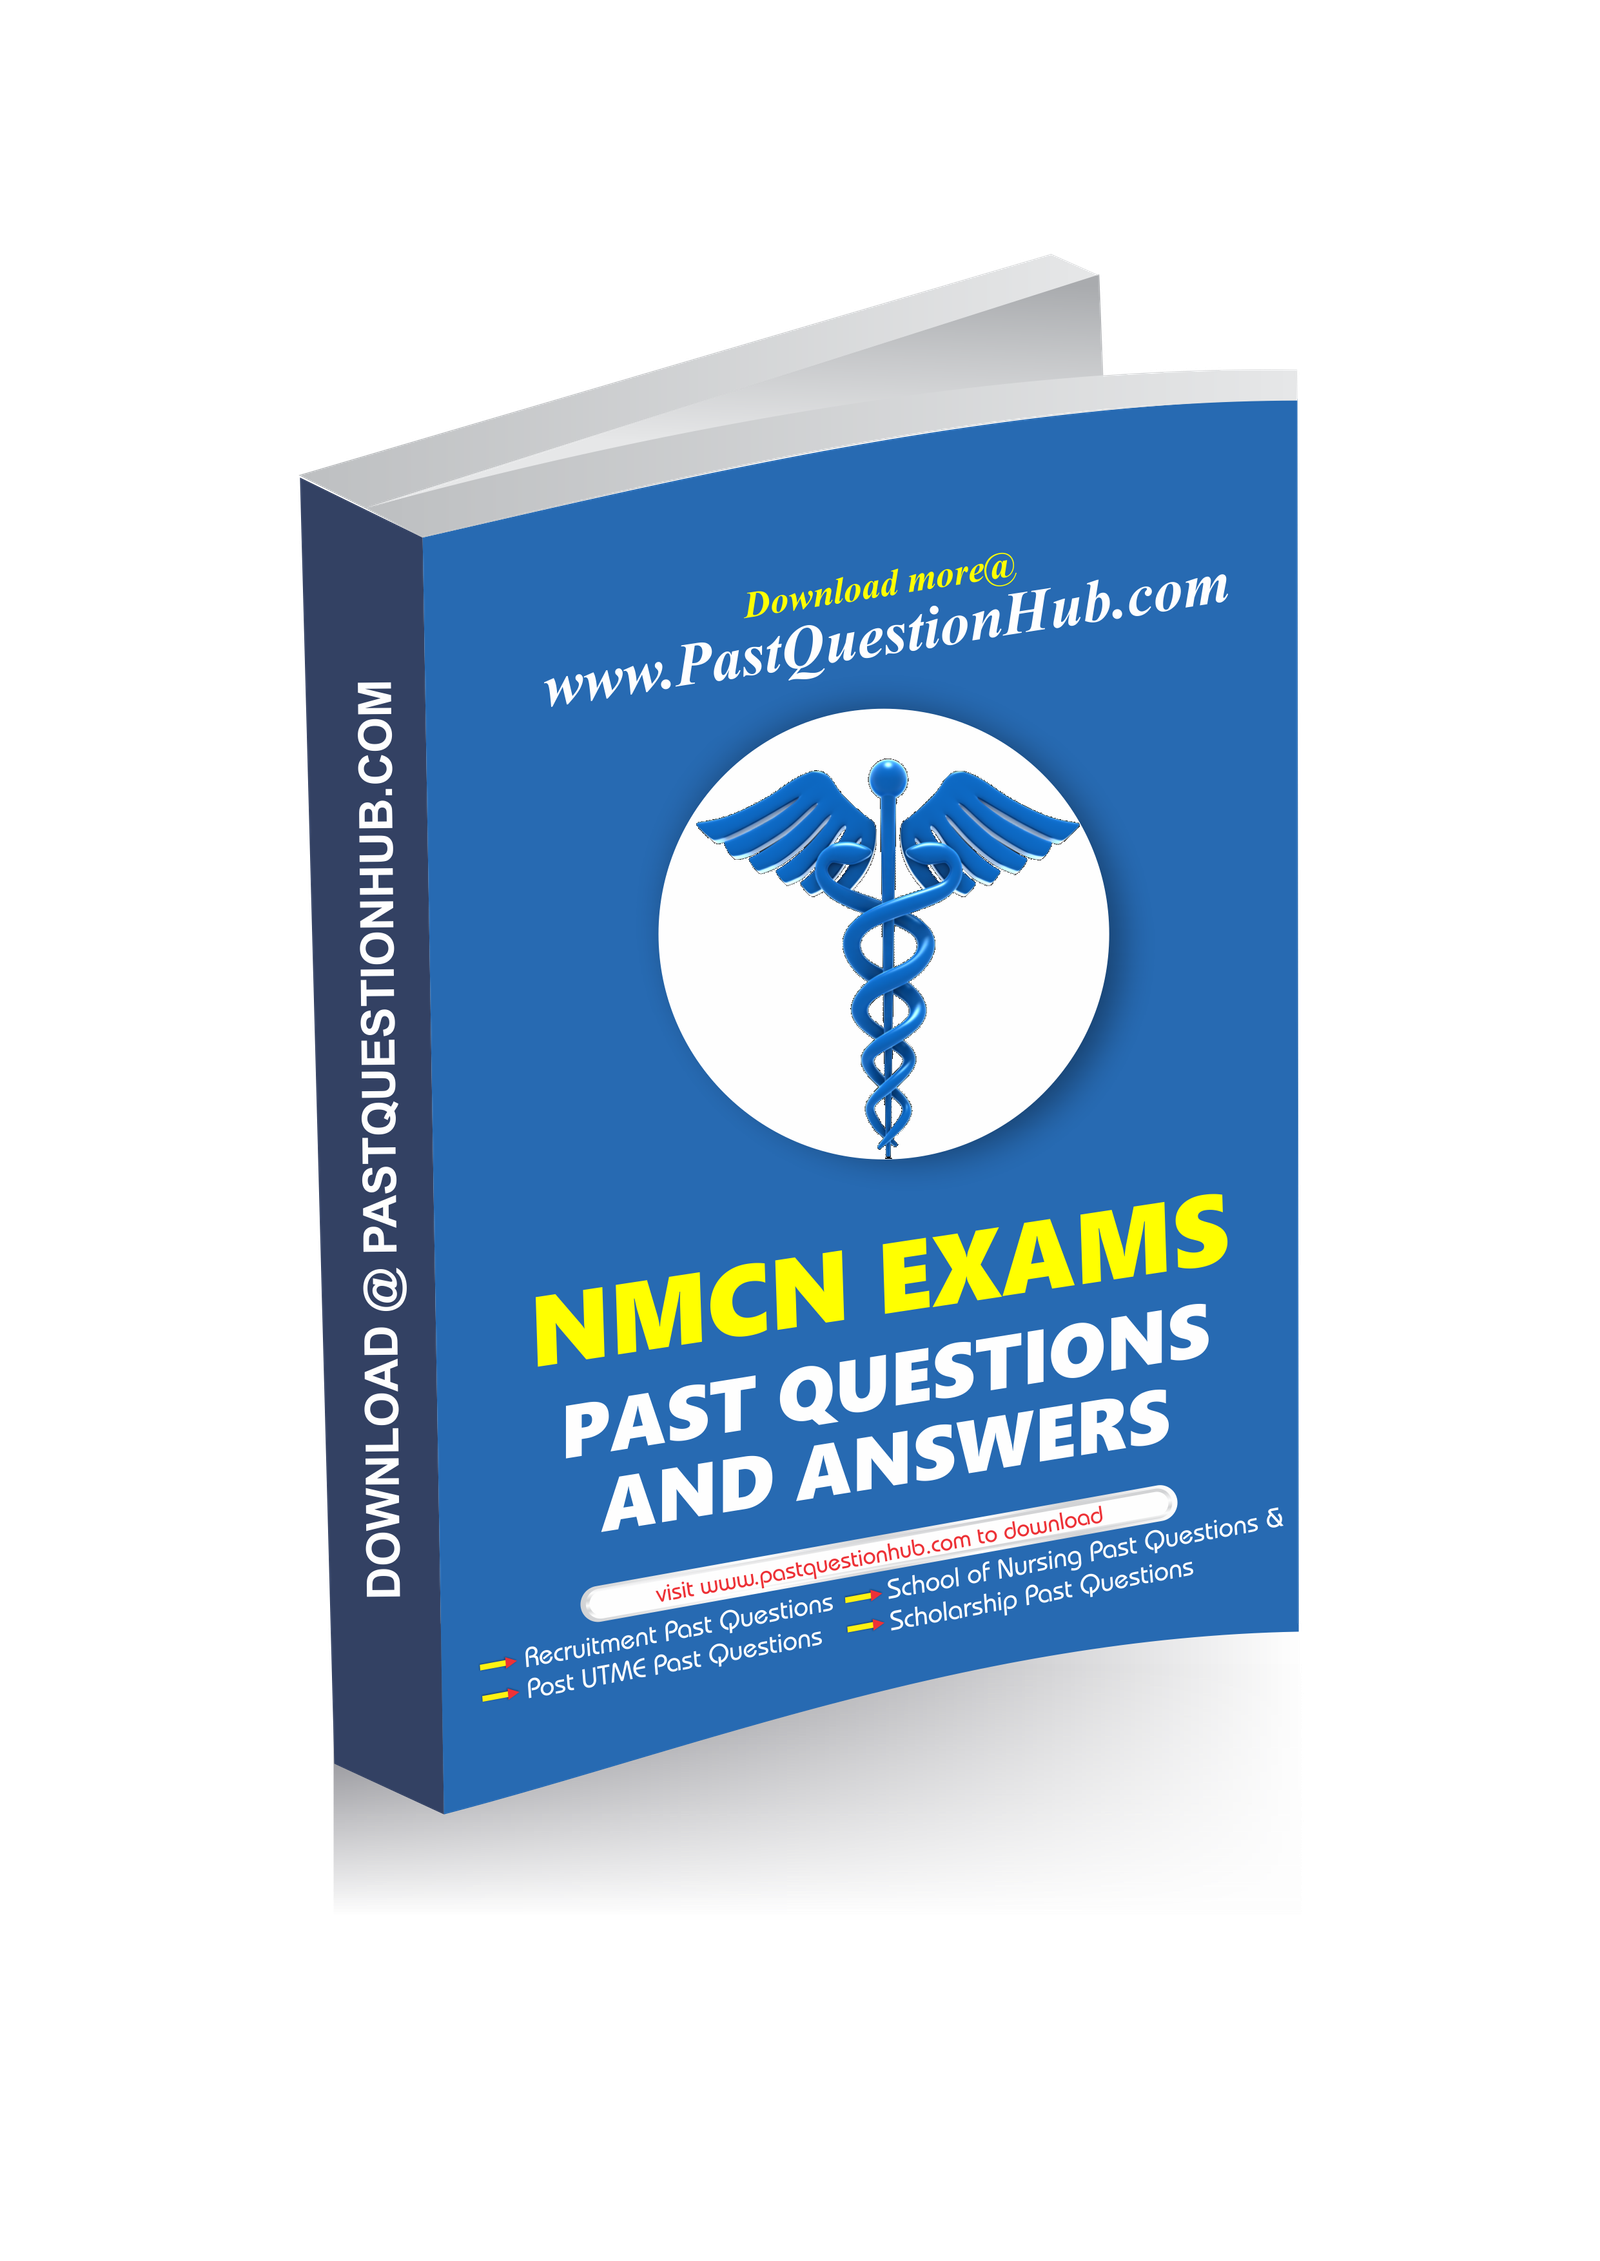 NMCN Past Questions & Answers